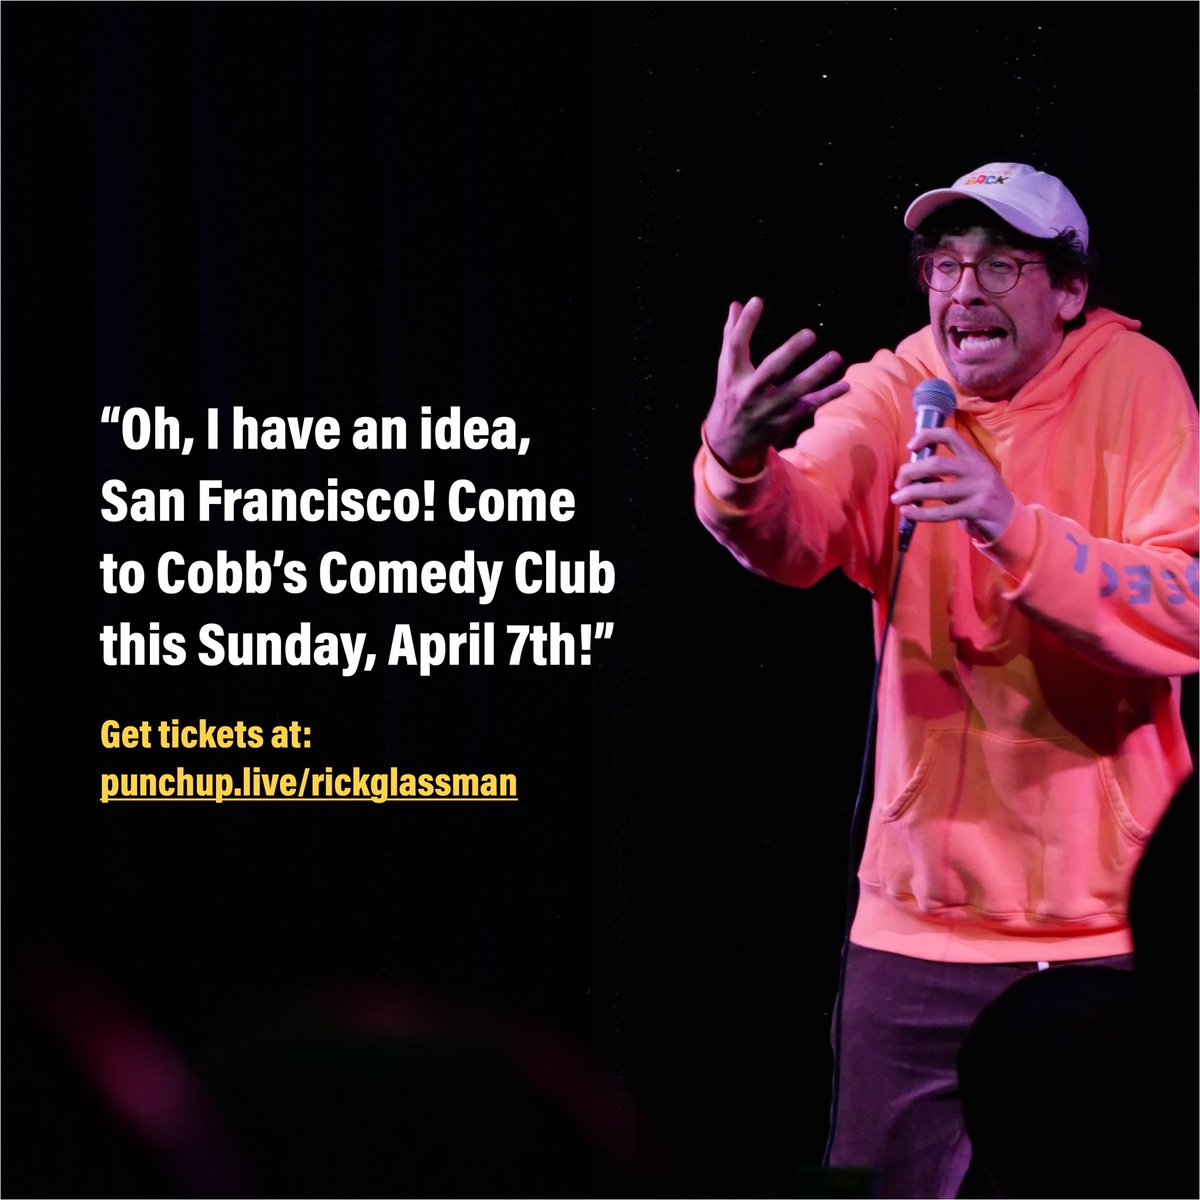 San Francisco! This Sunday I’m performing at @CobbsComedyClub! Get 🎟️🎟️ tickets here: punchup.live/rickglassman